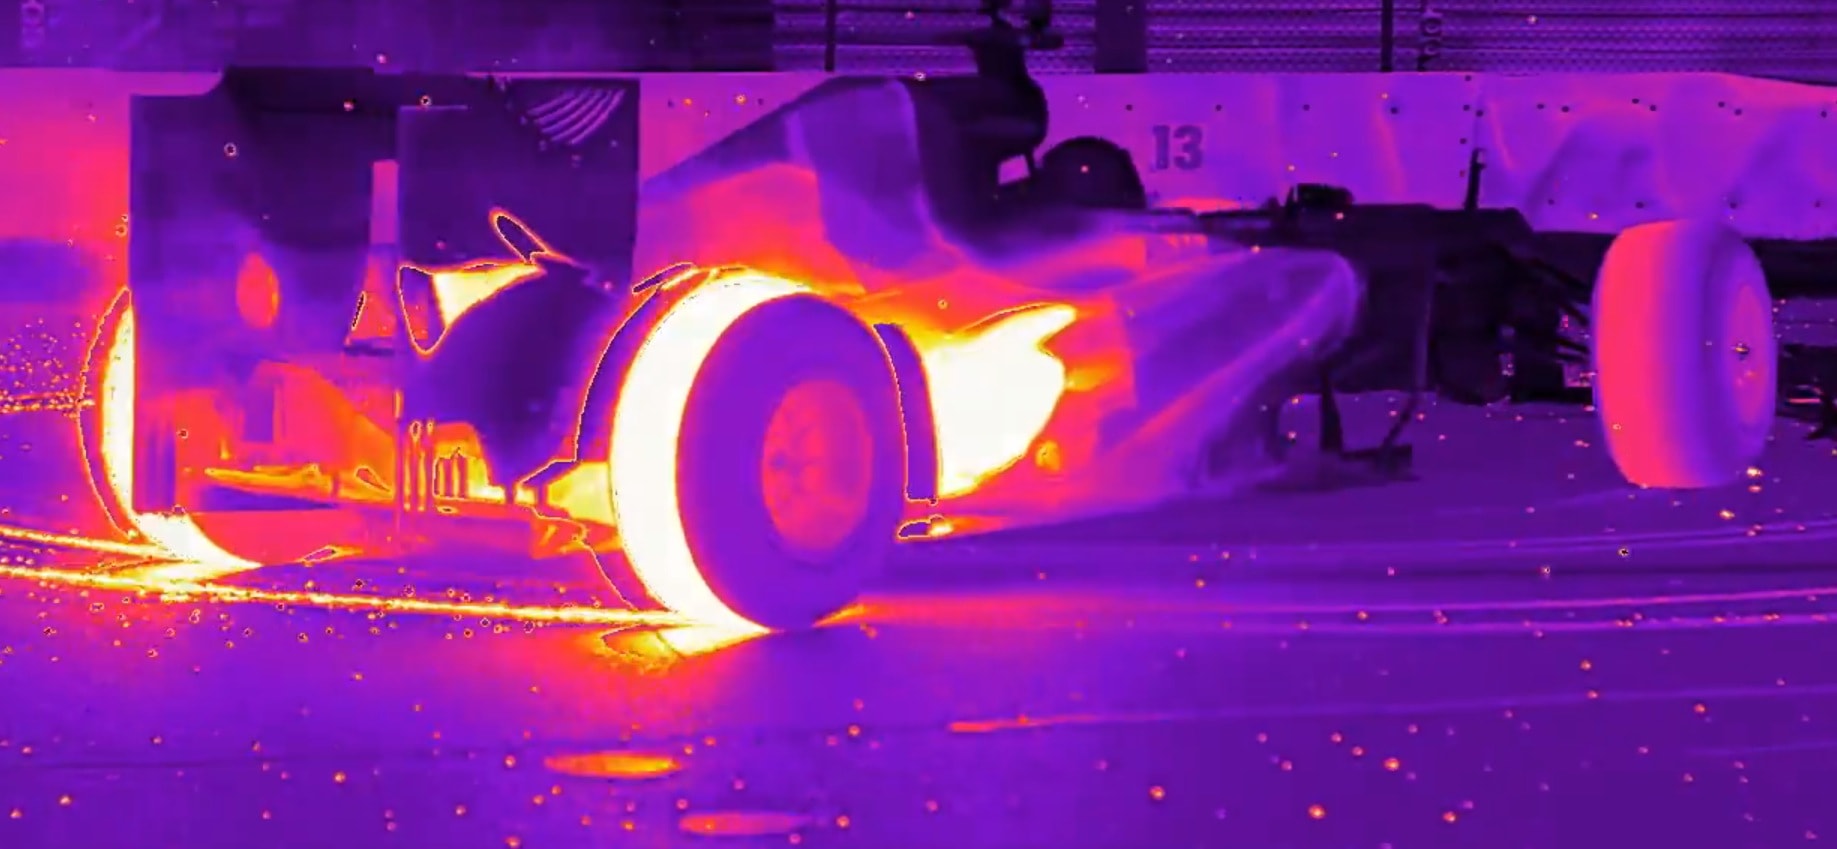 F1 Car Doing Donuts, the Thermal Camera Hot View 